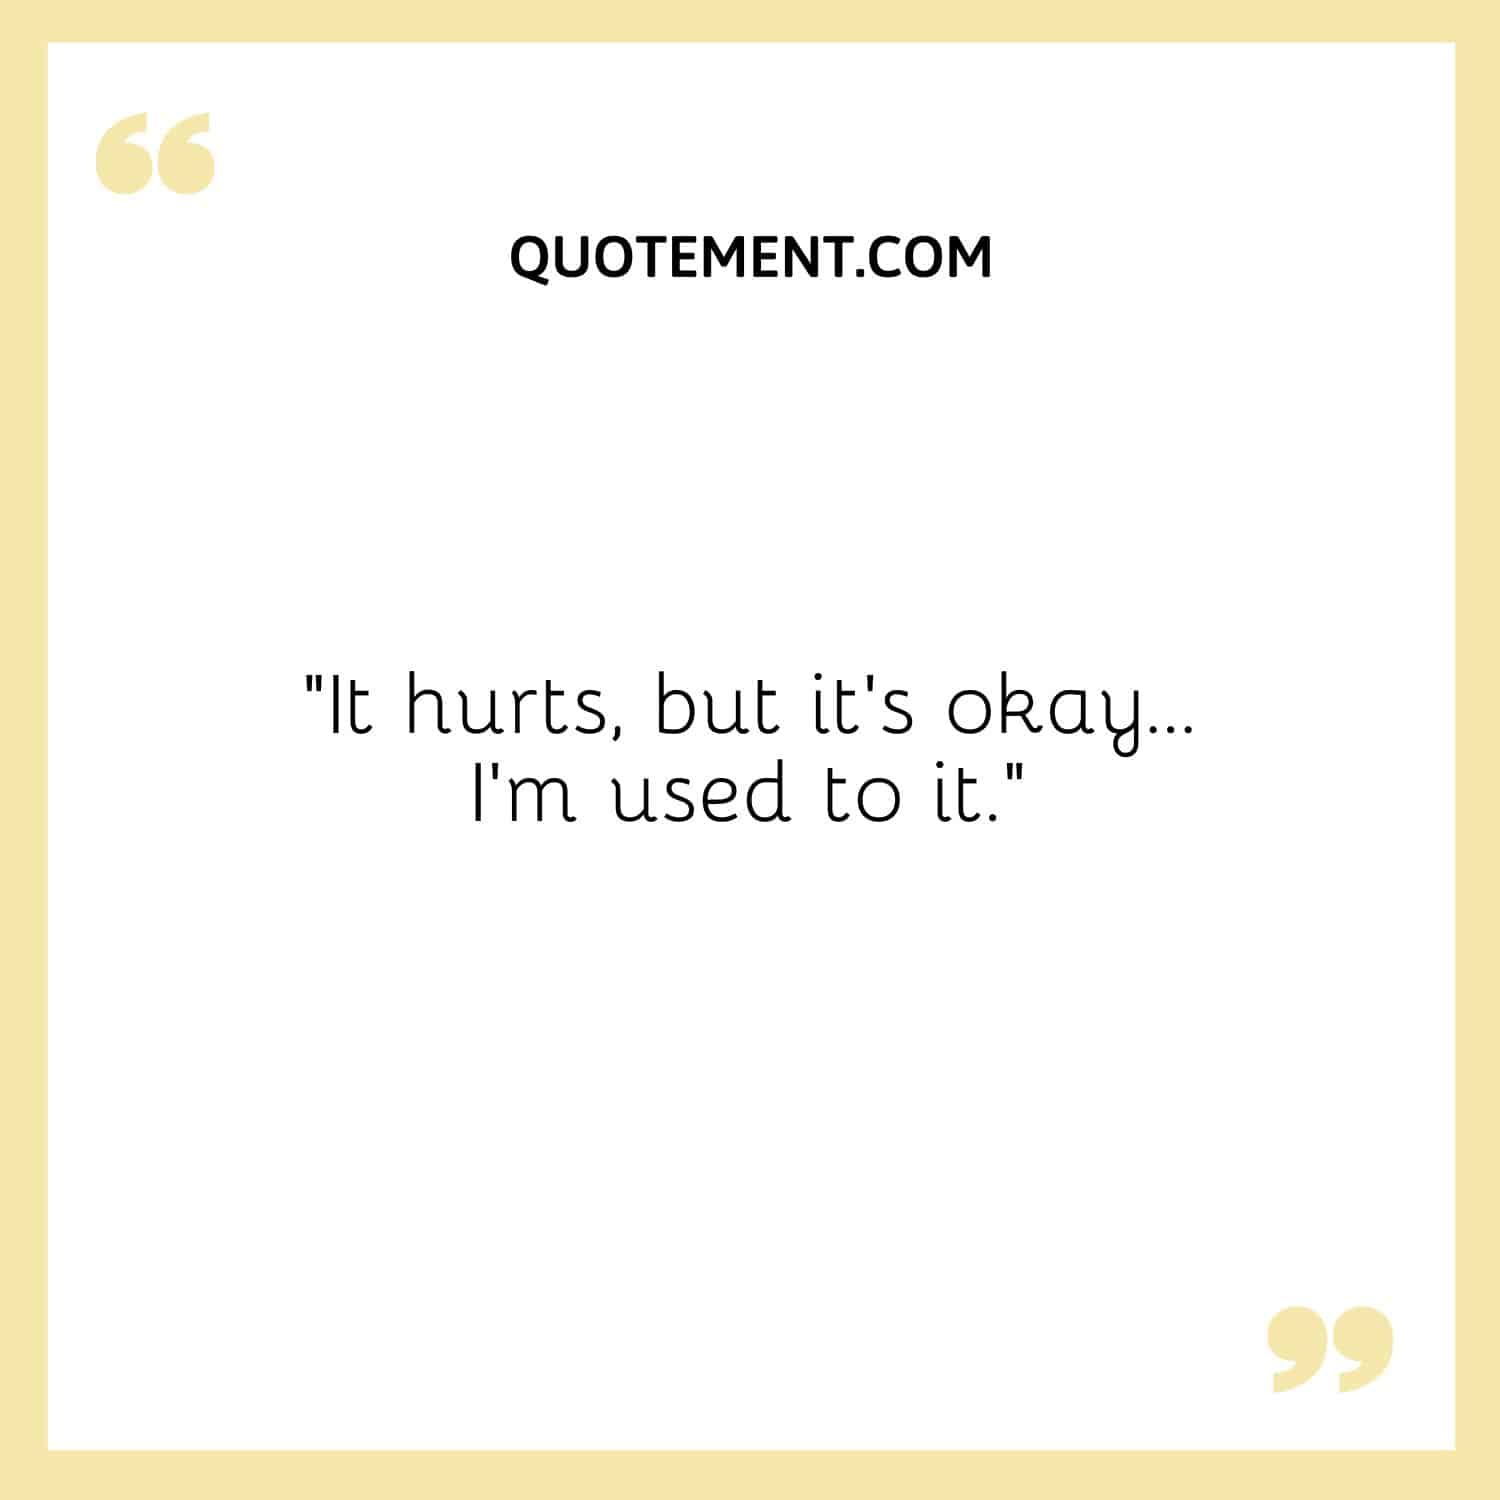 It hurts, but it's okay… I'm used to it